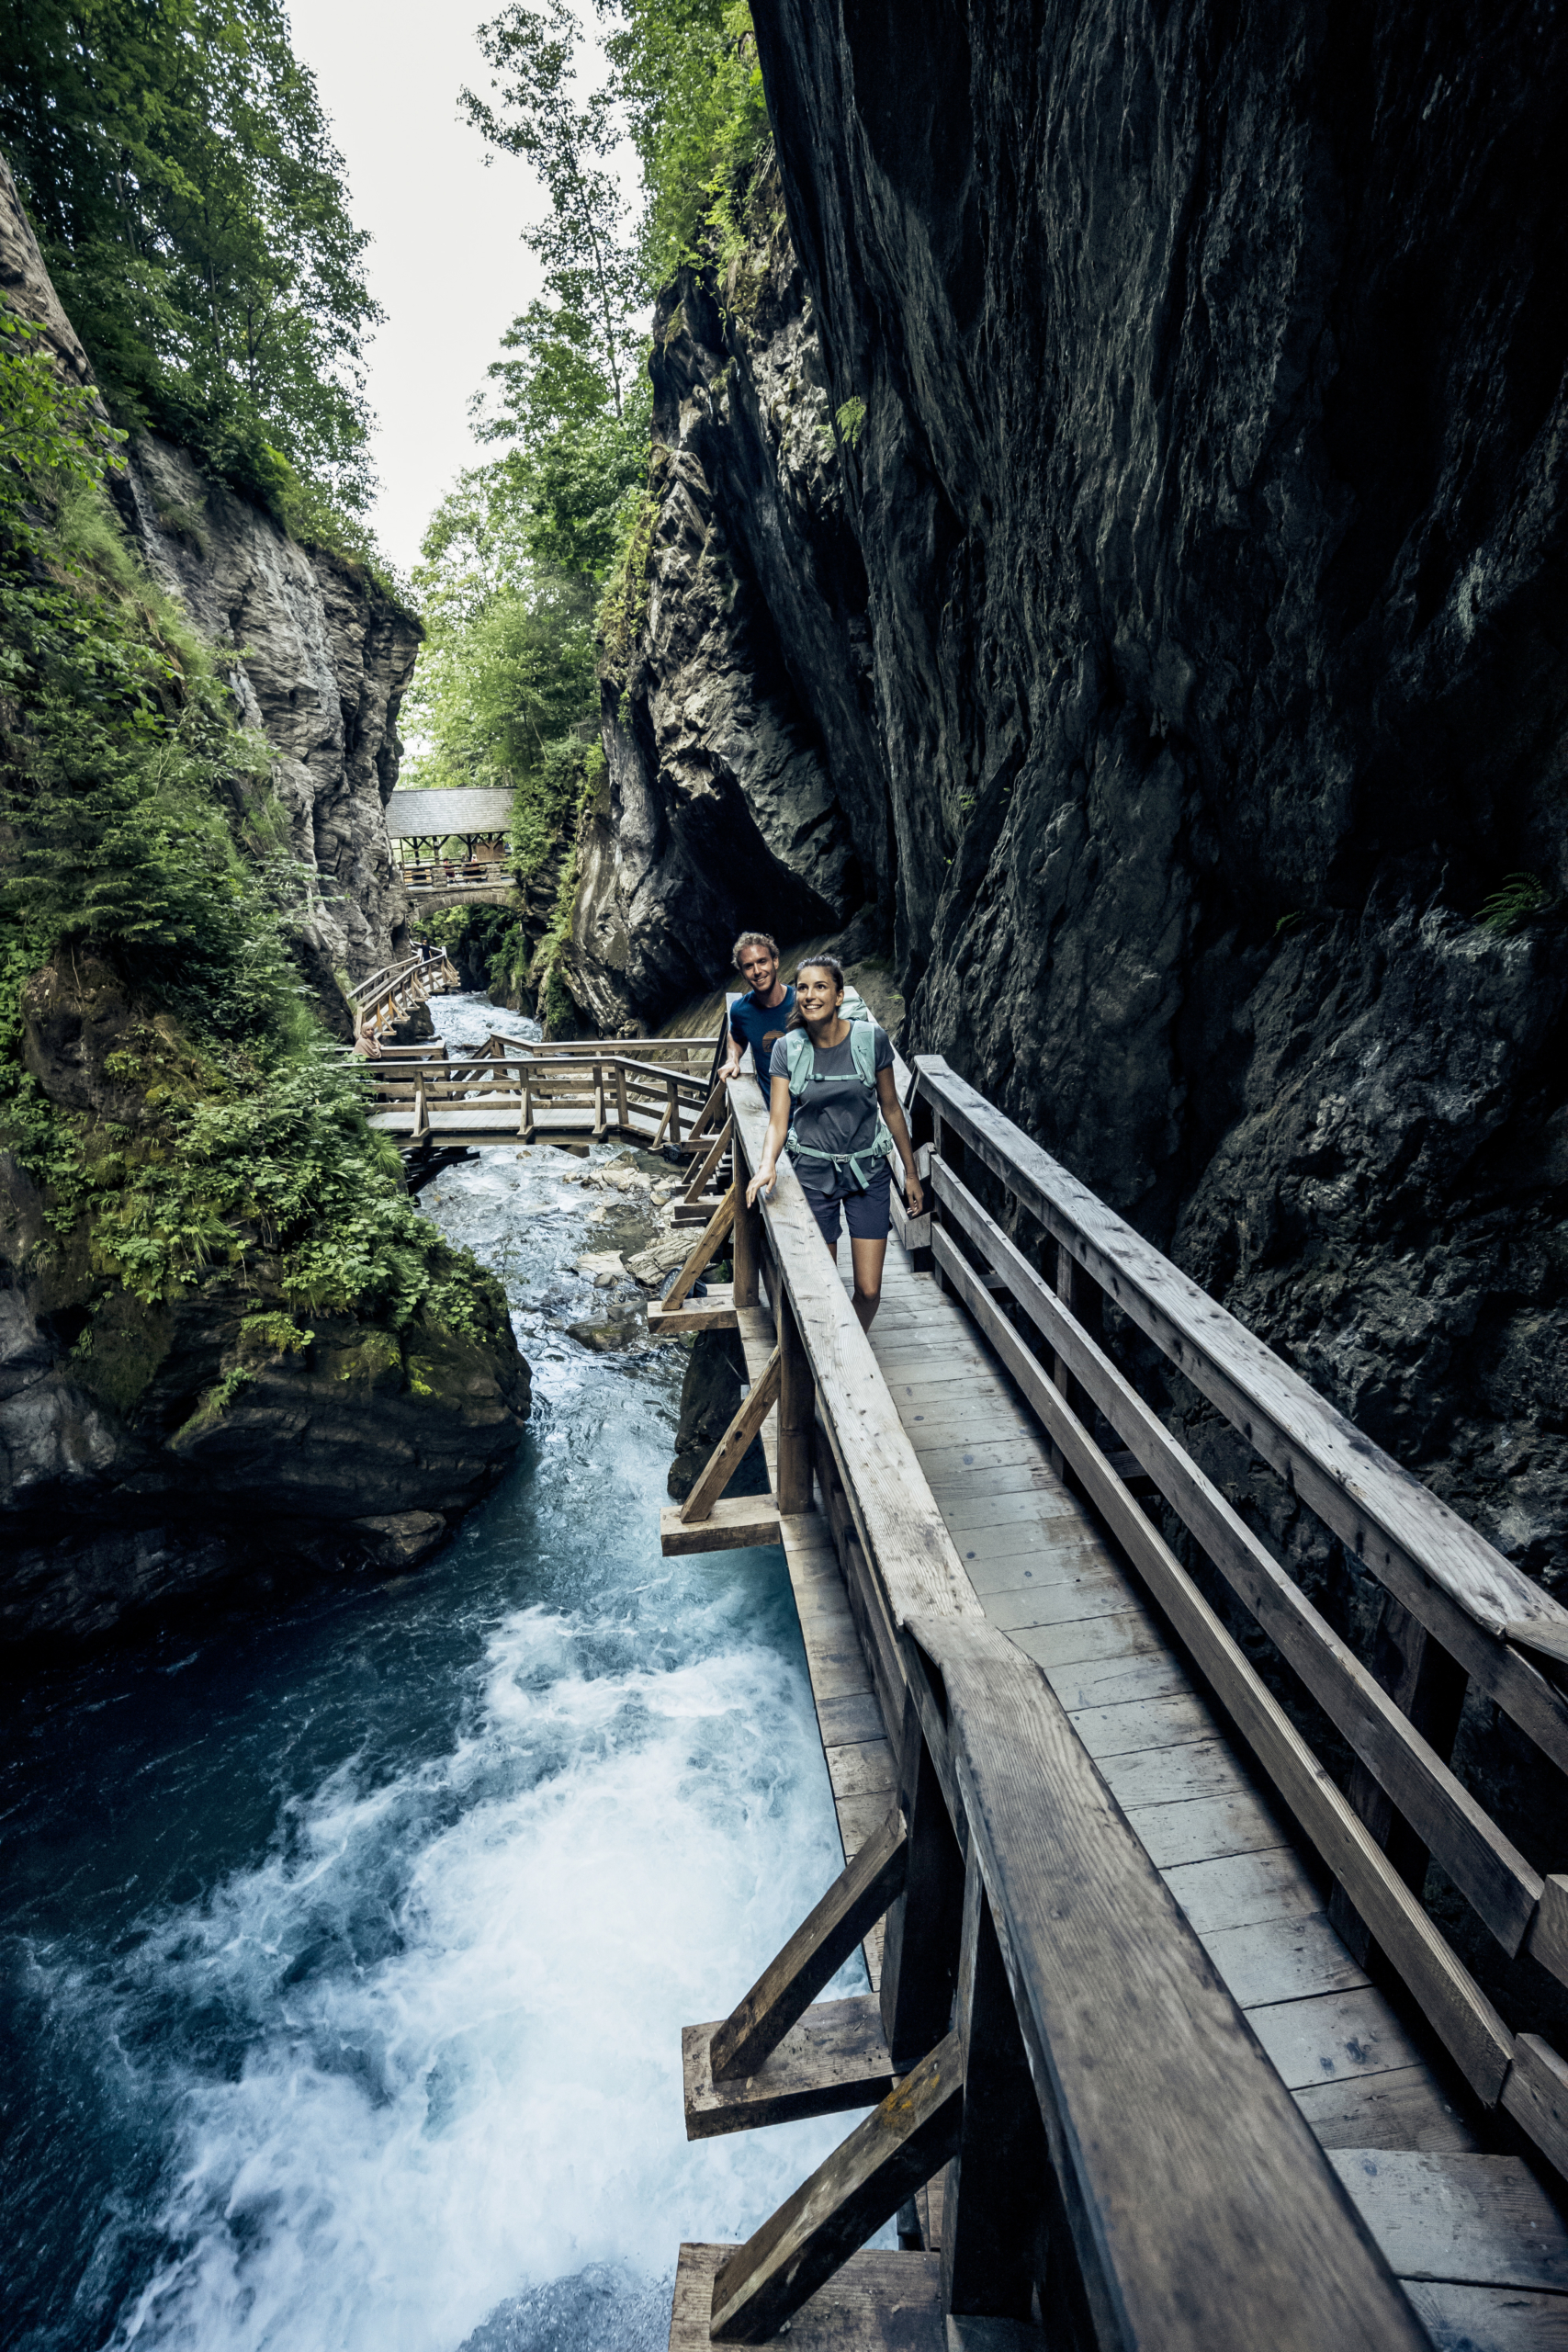 Sigmund Thun Klamm - an experience for all age groups